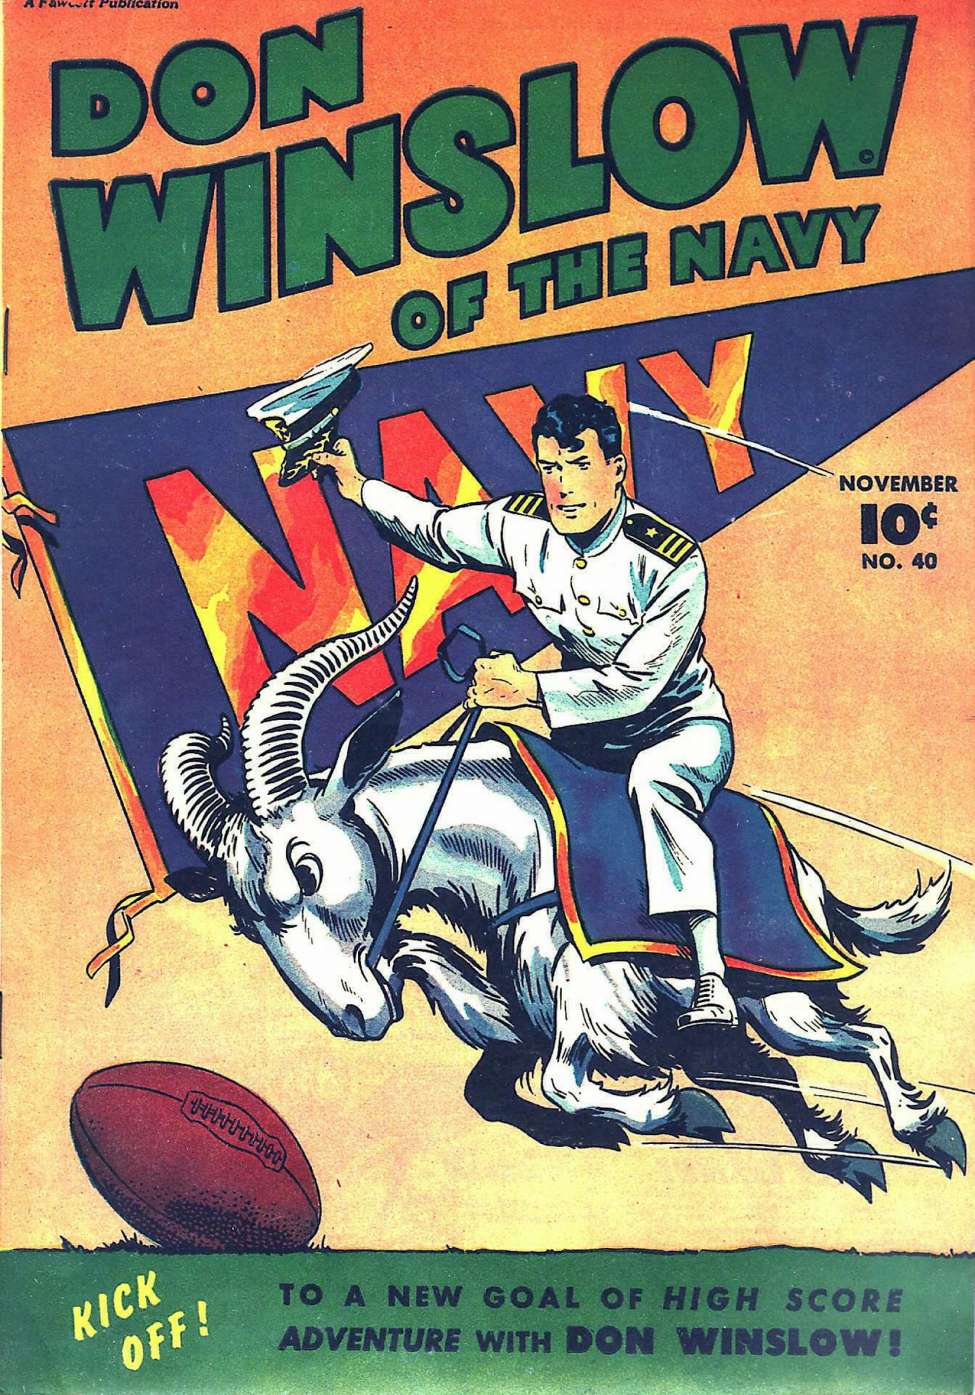 Comic Book Cover For Don Winslow of the Navy 40 - Version 2